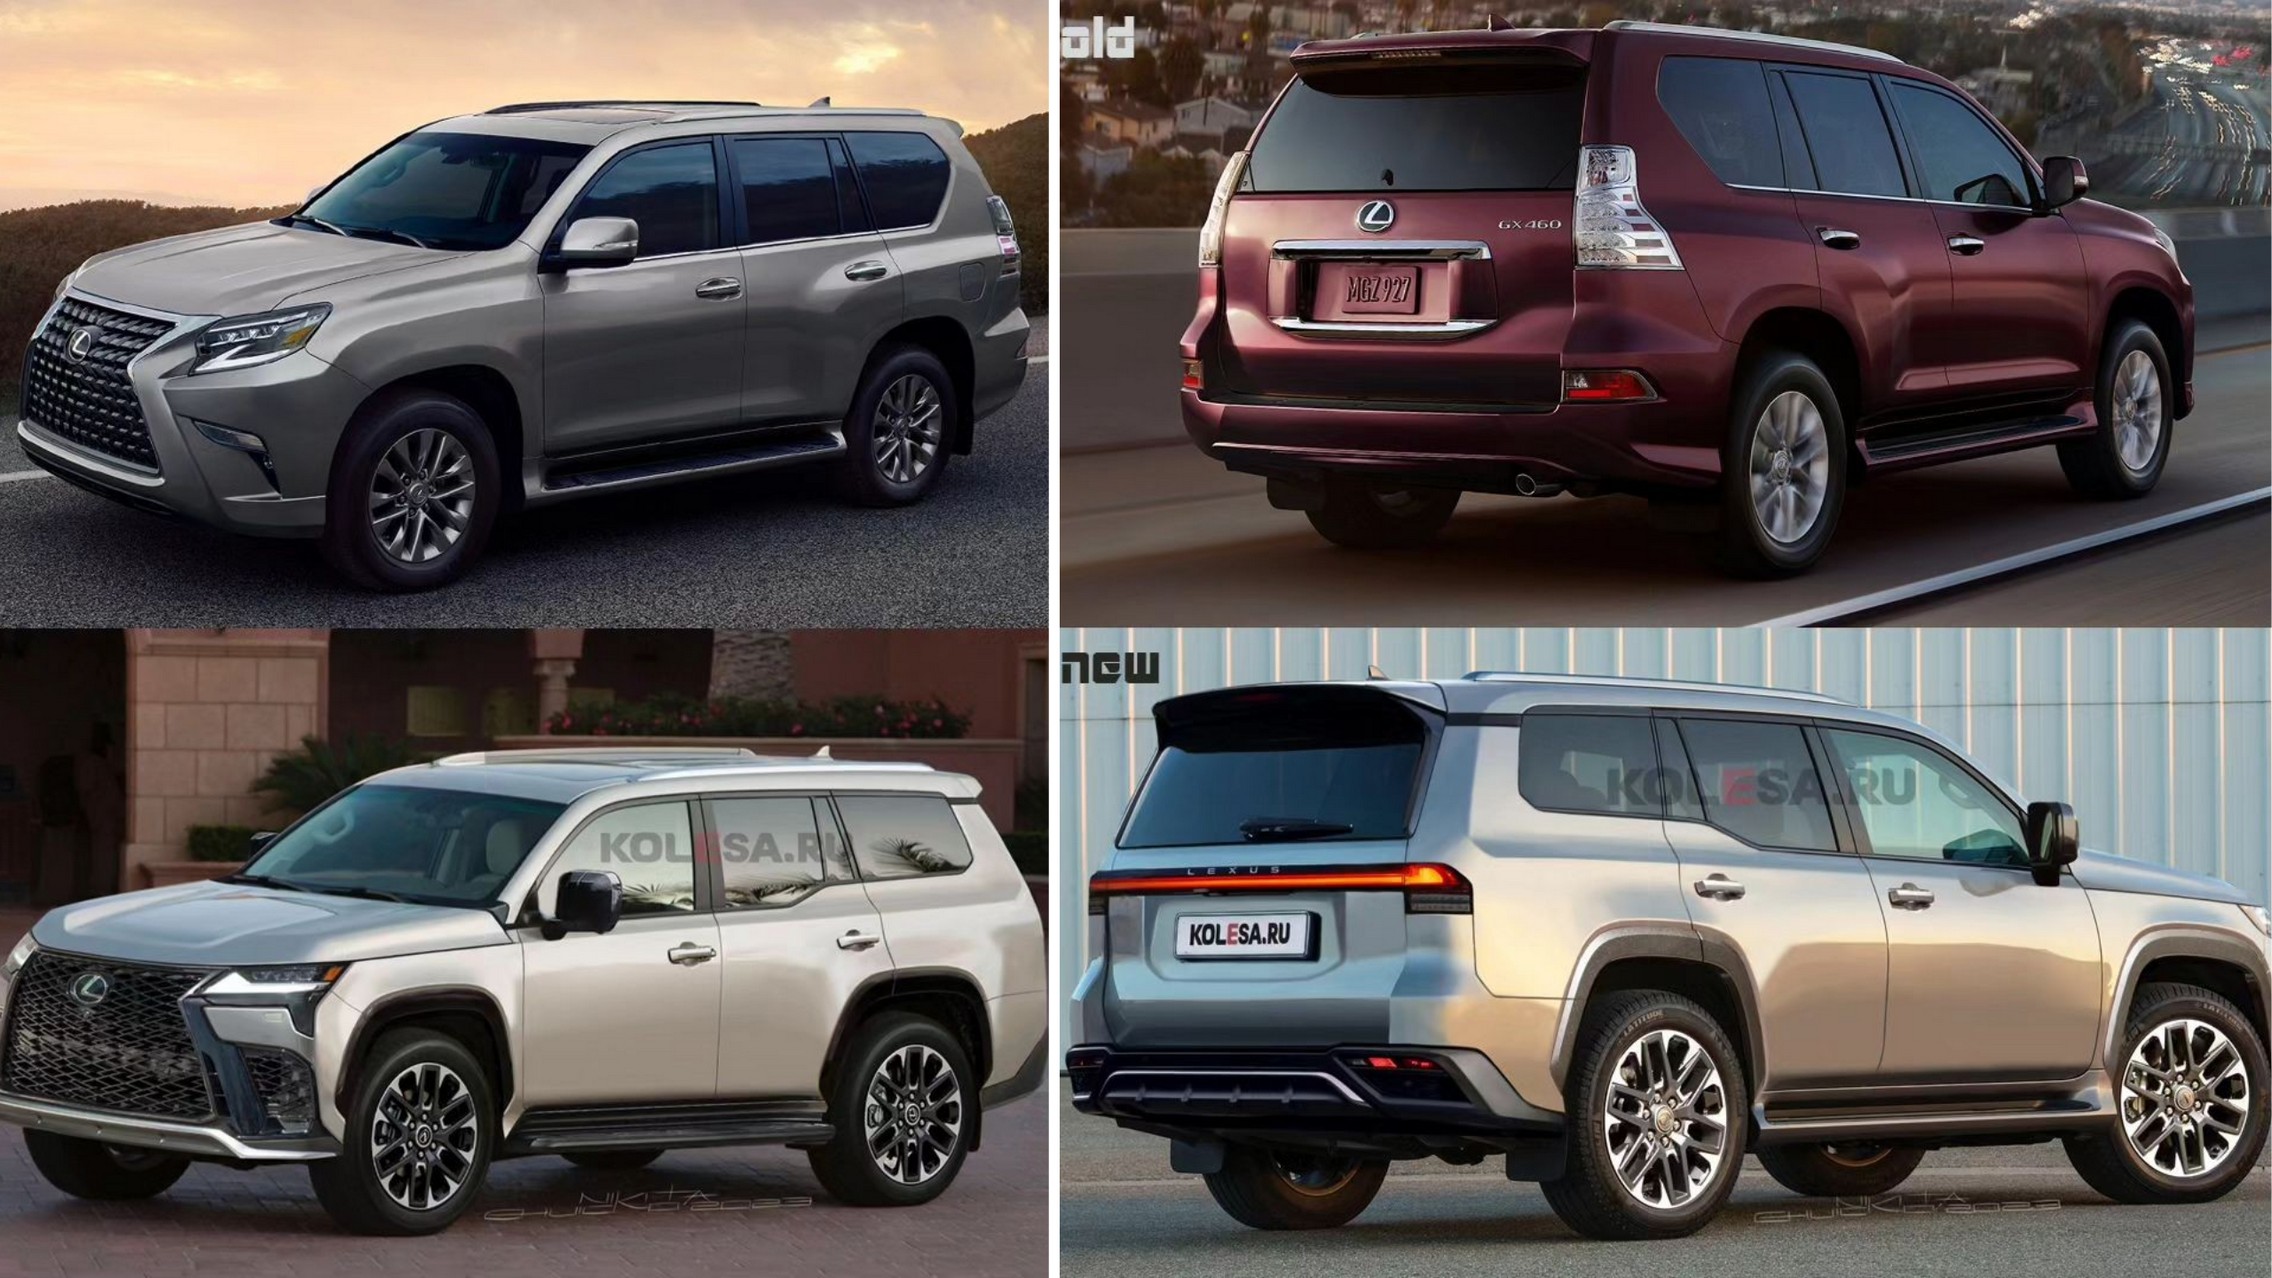 2024 Lexus Lx Renderings Show Everything And They Re Probably Spot On The Dna 215757 1 